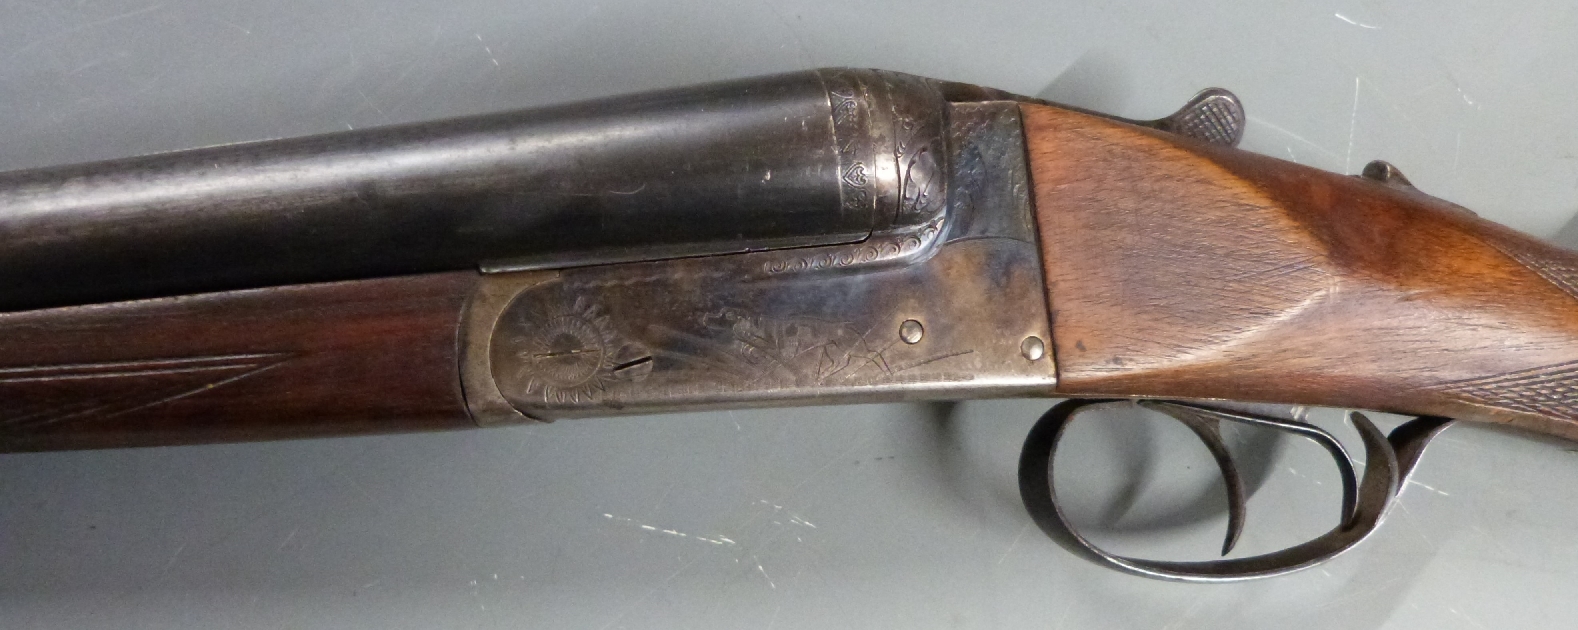 Essex 12 bore side by side shotgun with engraved locks, trigger guard underside and top plate, - Image 5 of 7